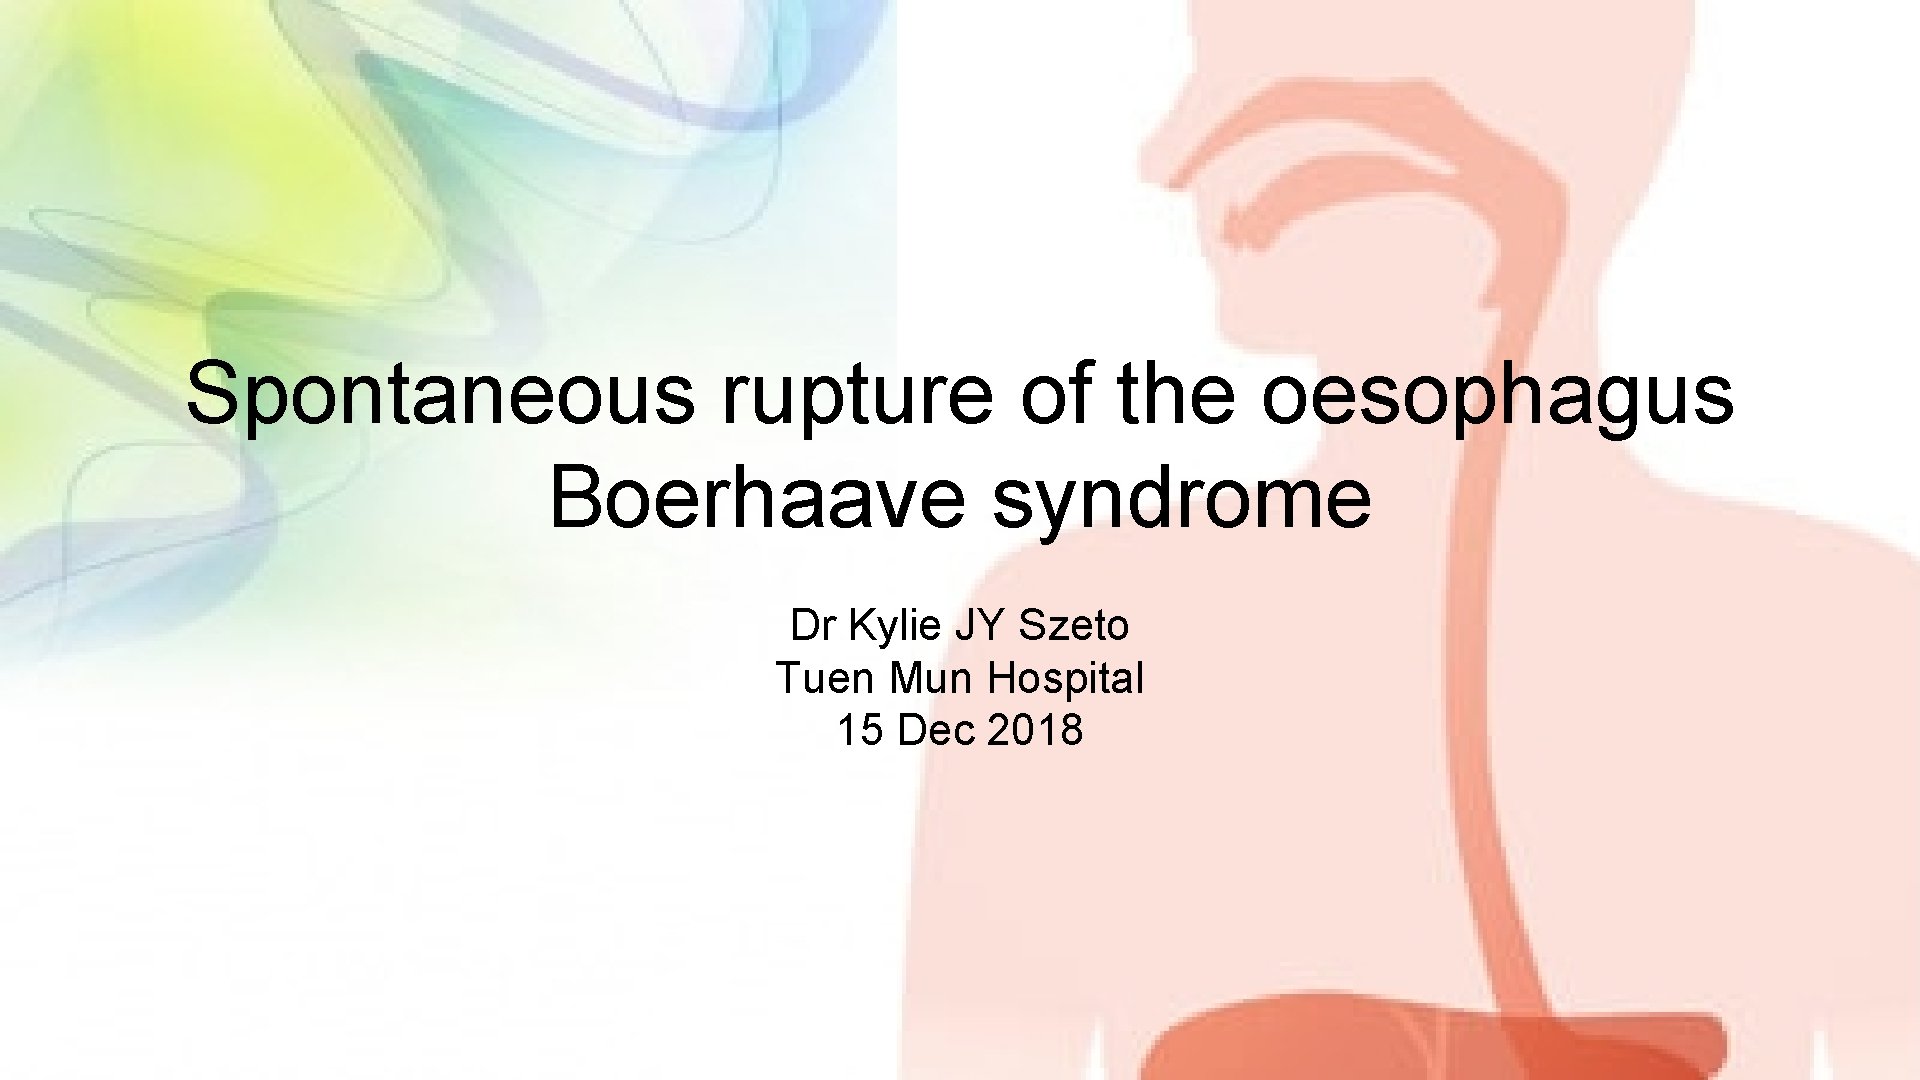 Spontaneous rupture of the oesophagus Boerhaave syndrome Dr Kylie JY Szeto Tuen Mun Hospital